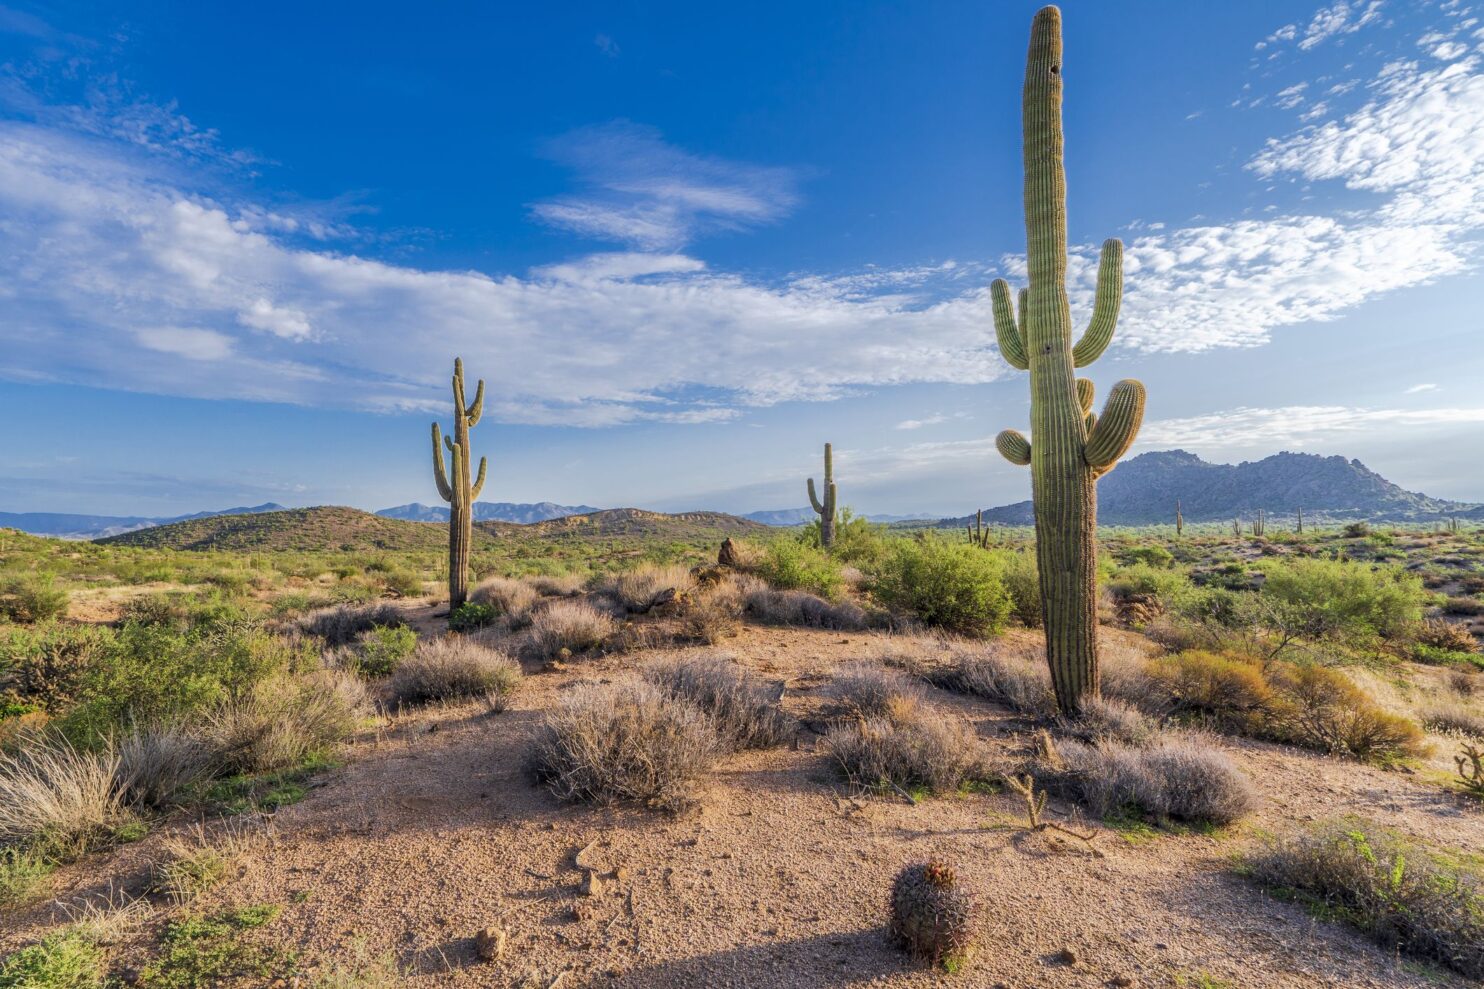 A group of cactus in a desert with Saguaro National Park in the background